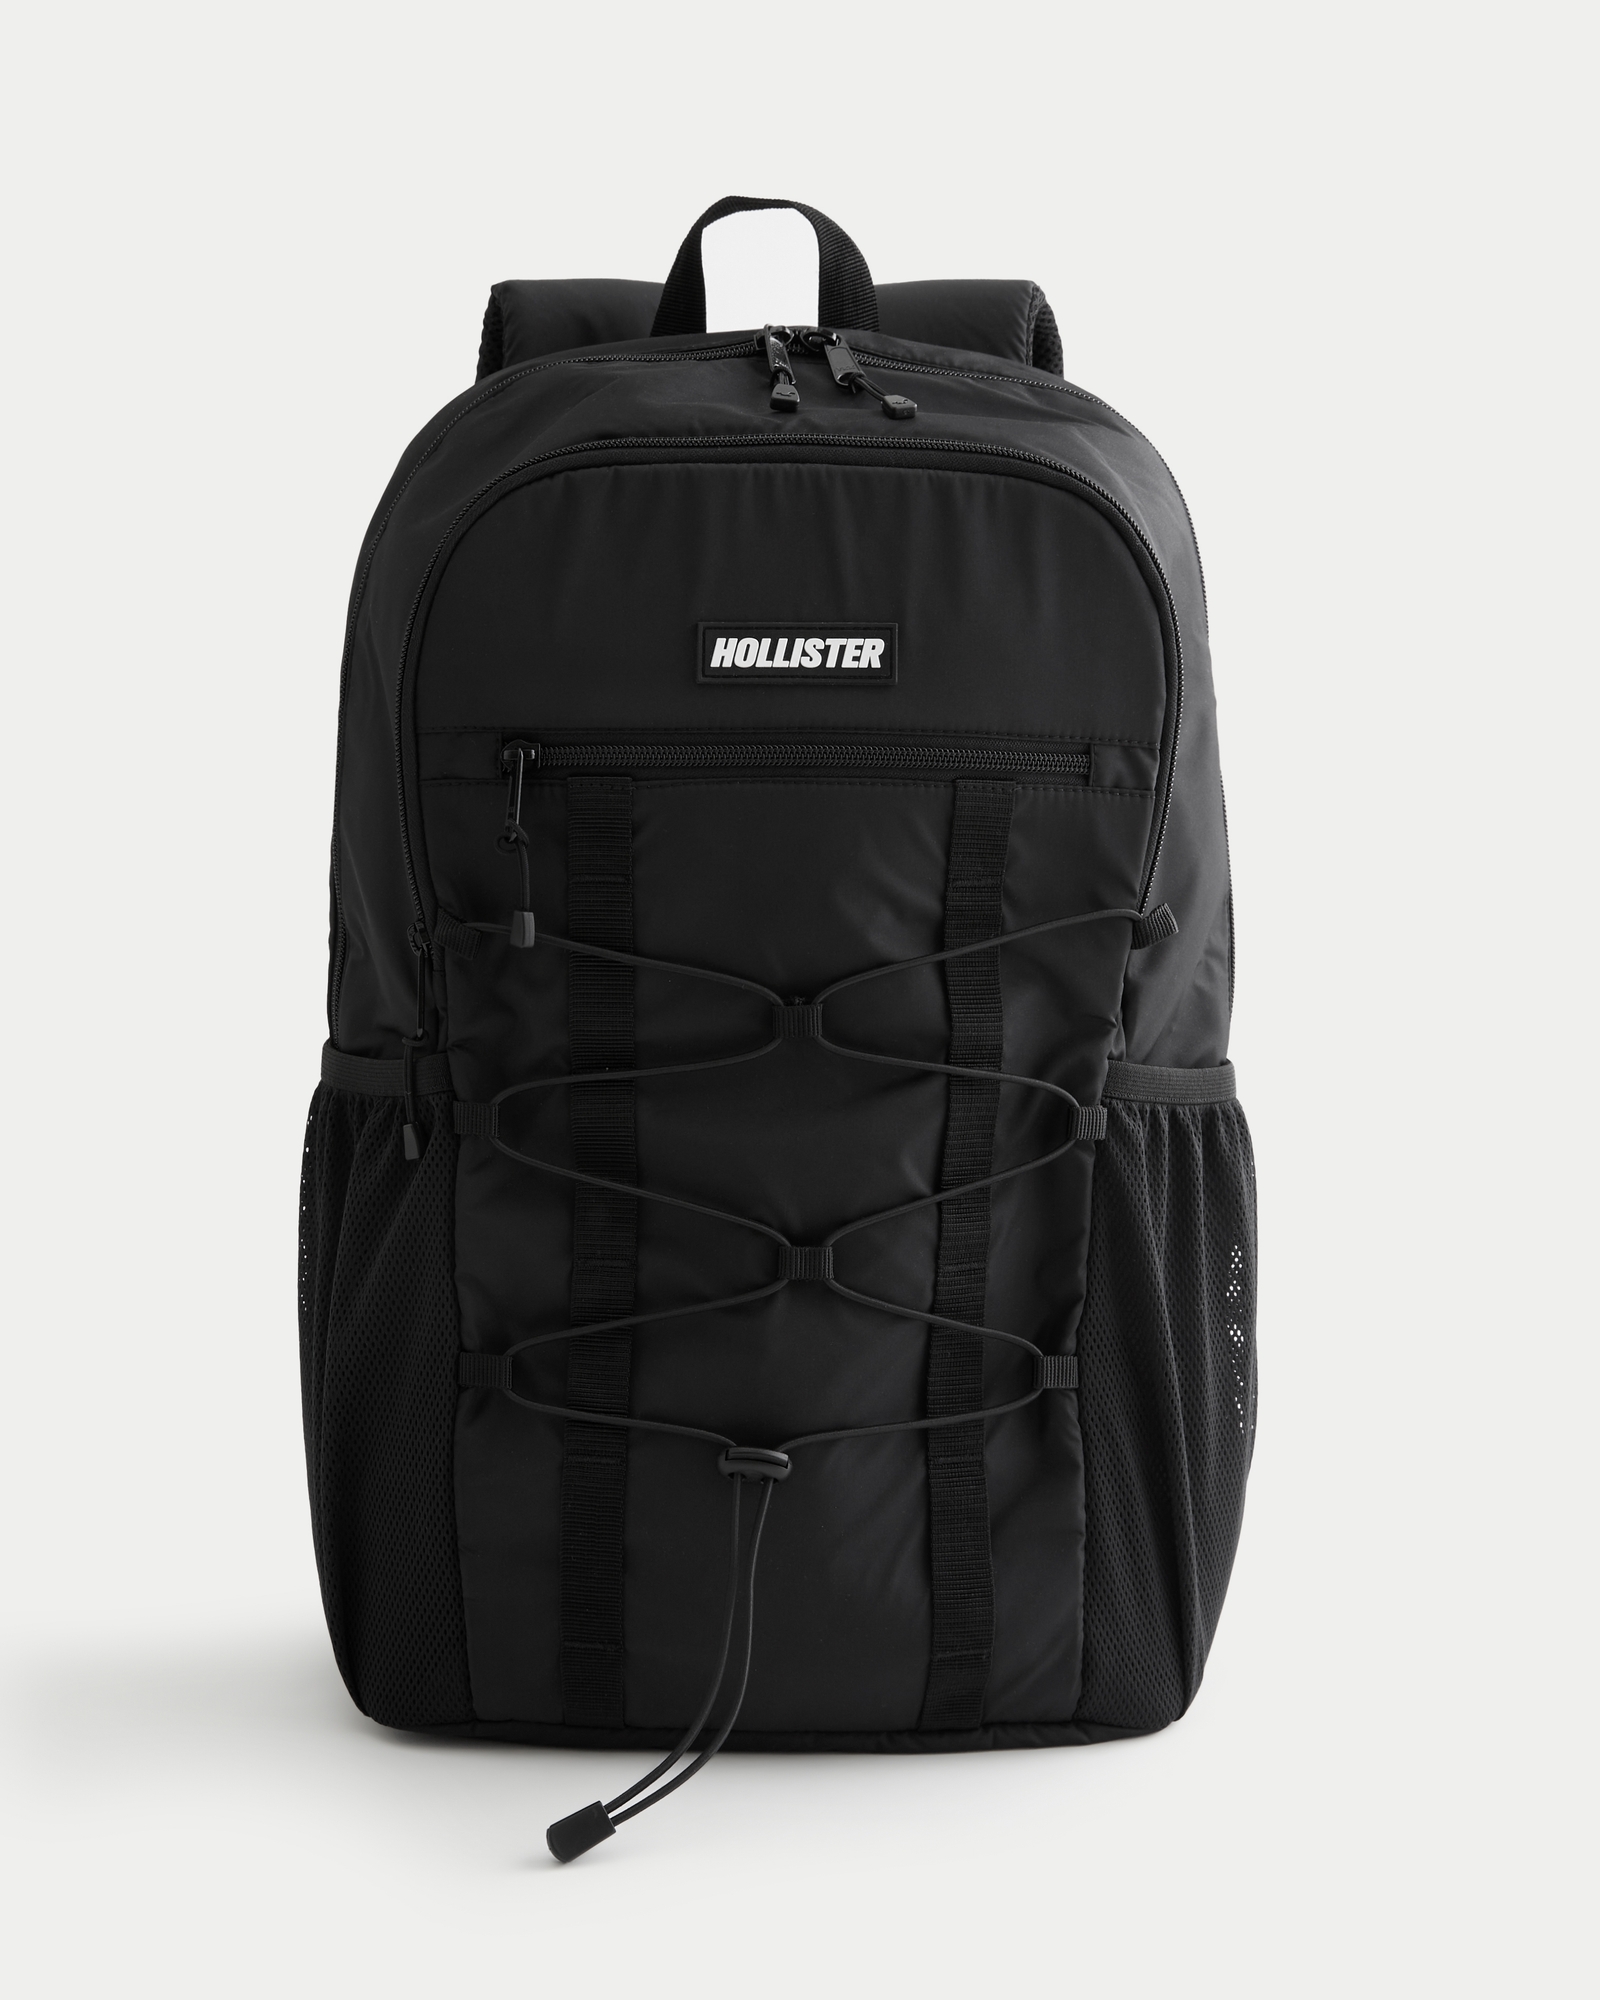 Under One Sky Mini Backpack Black - $15 (50% Off Retail) - From